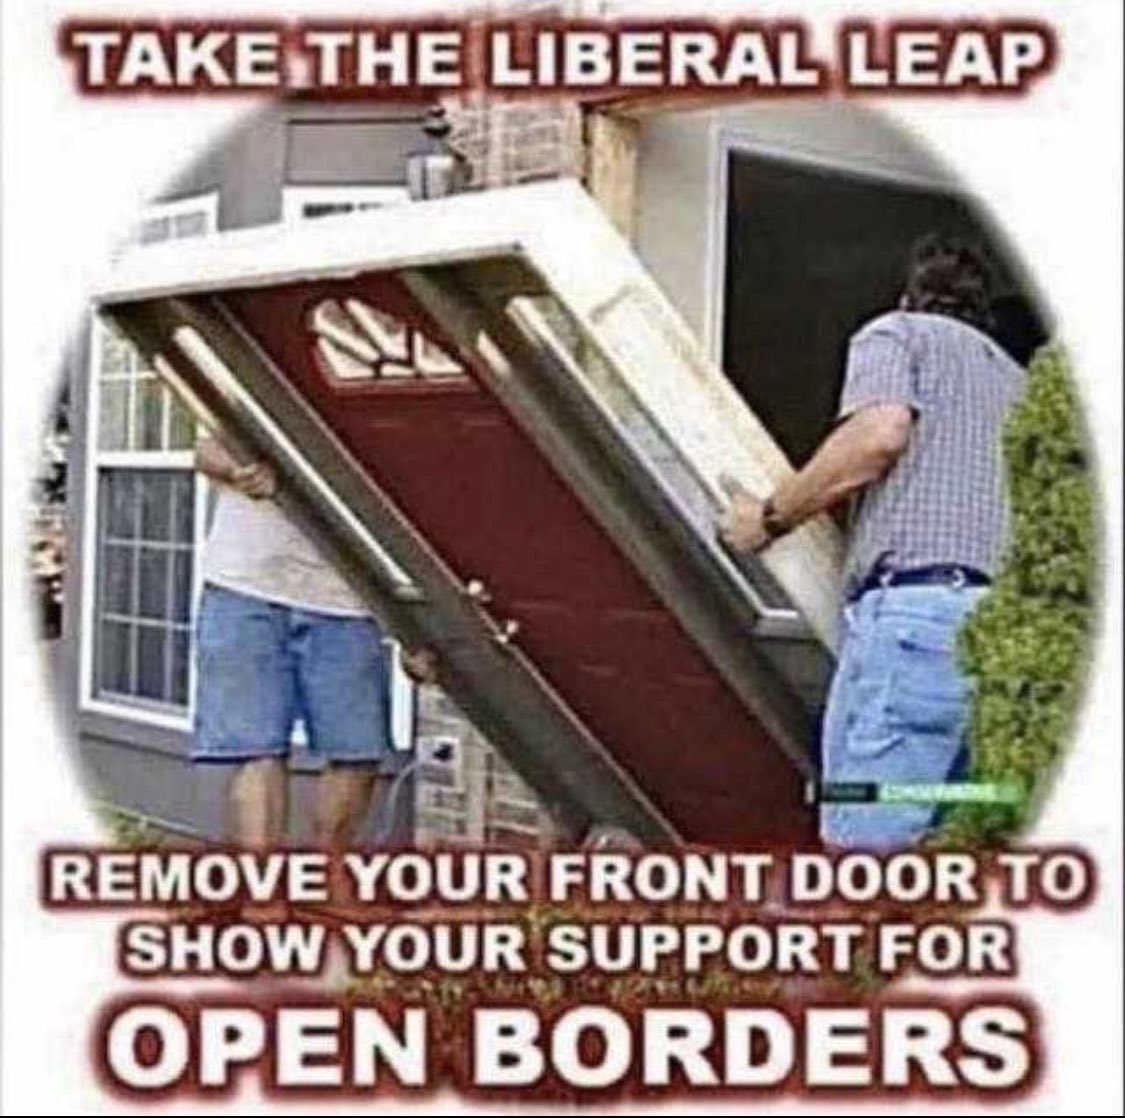 For all my Liberal friends, will you comply?